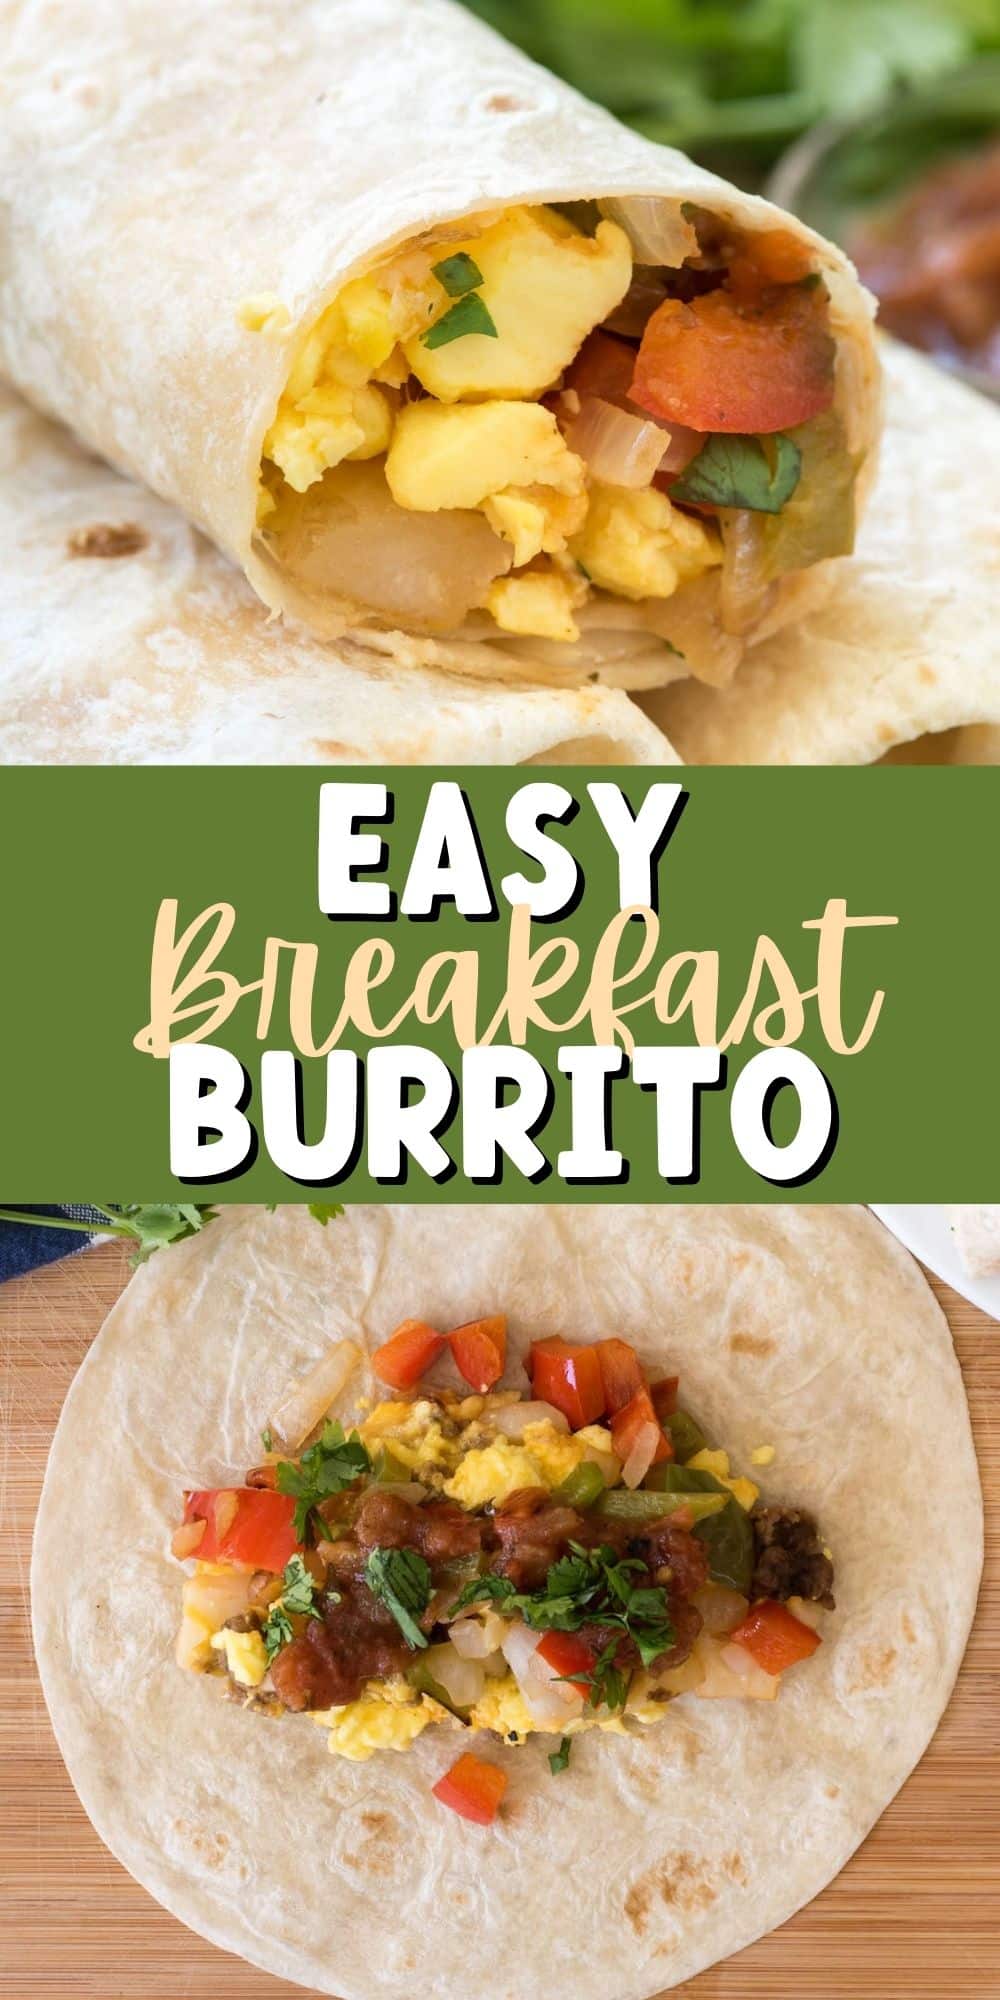 two photos of burrito stuffed with eggs and veggies